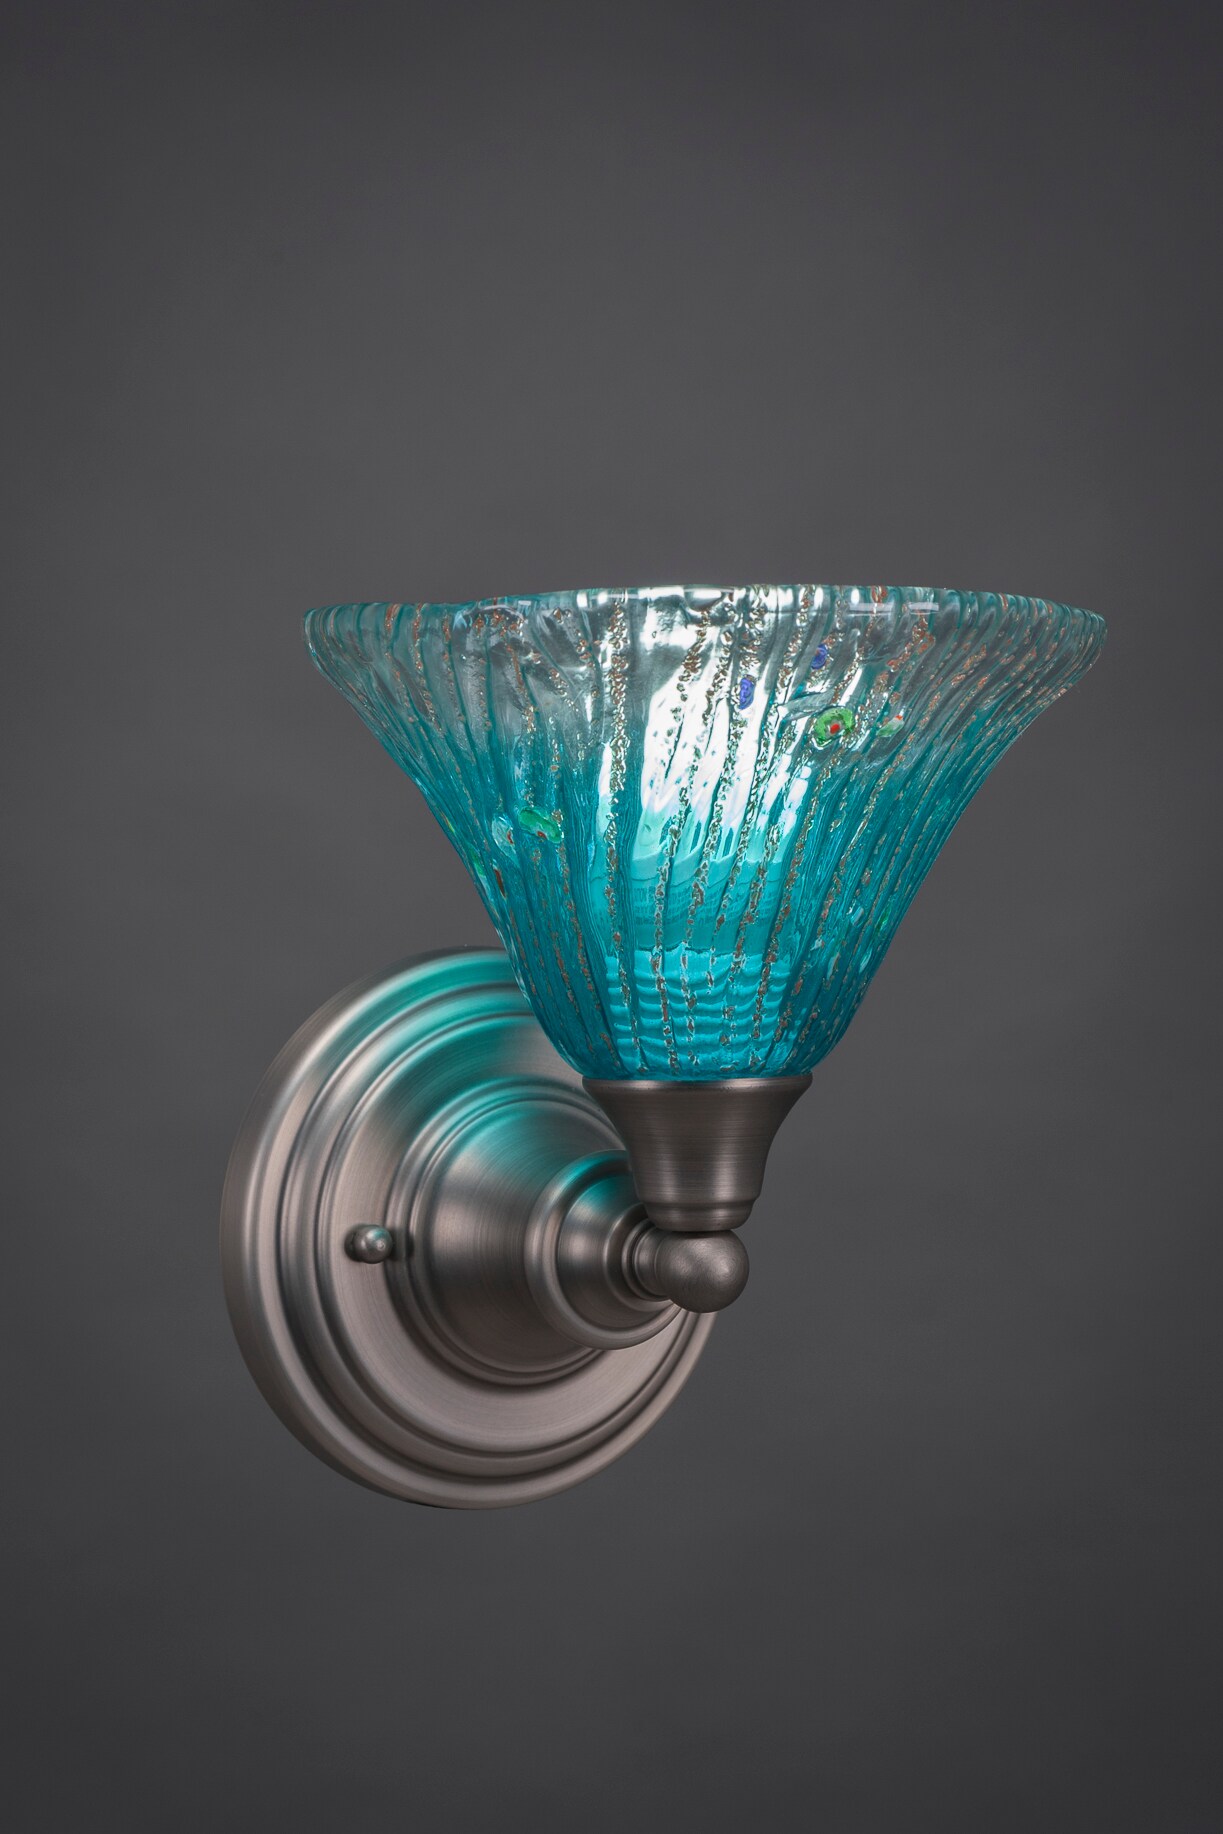 Wall Sconce Shown In Brushed Nickel Finish With 7 Teal Crystal Glass